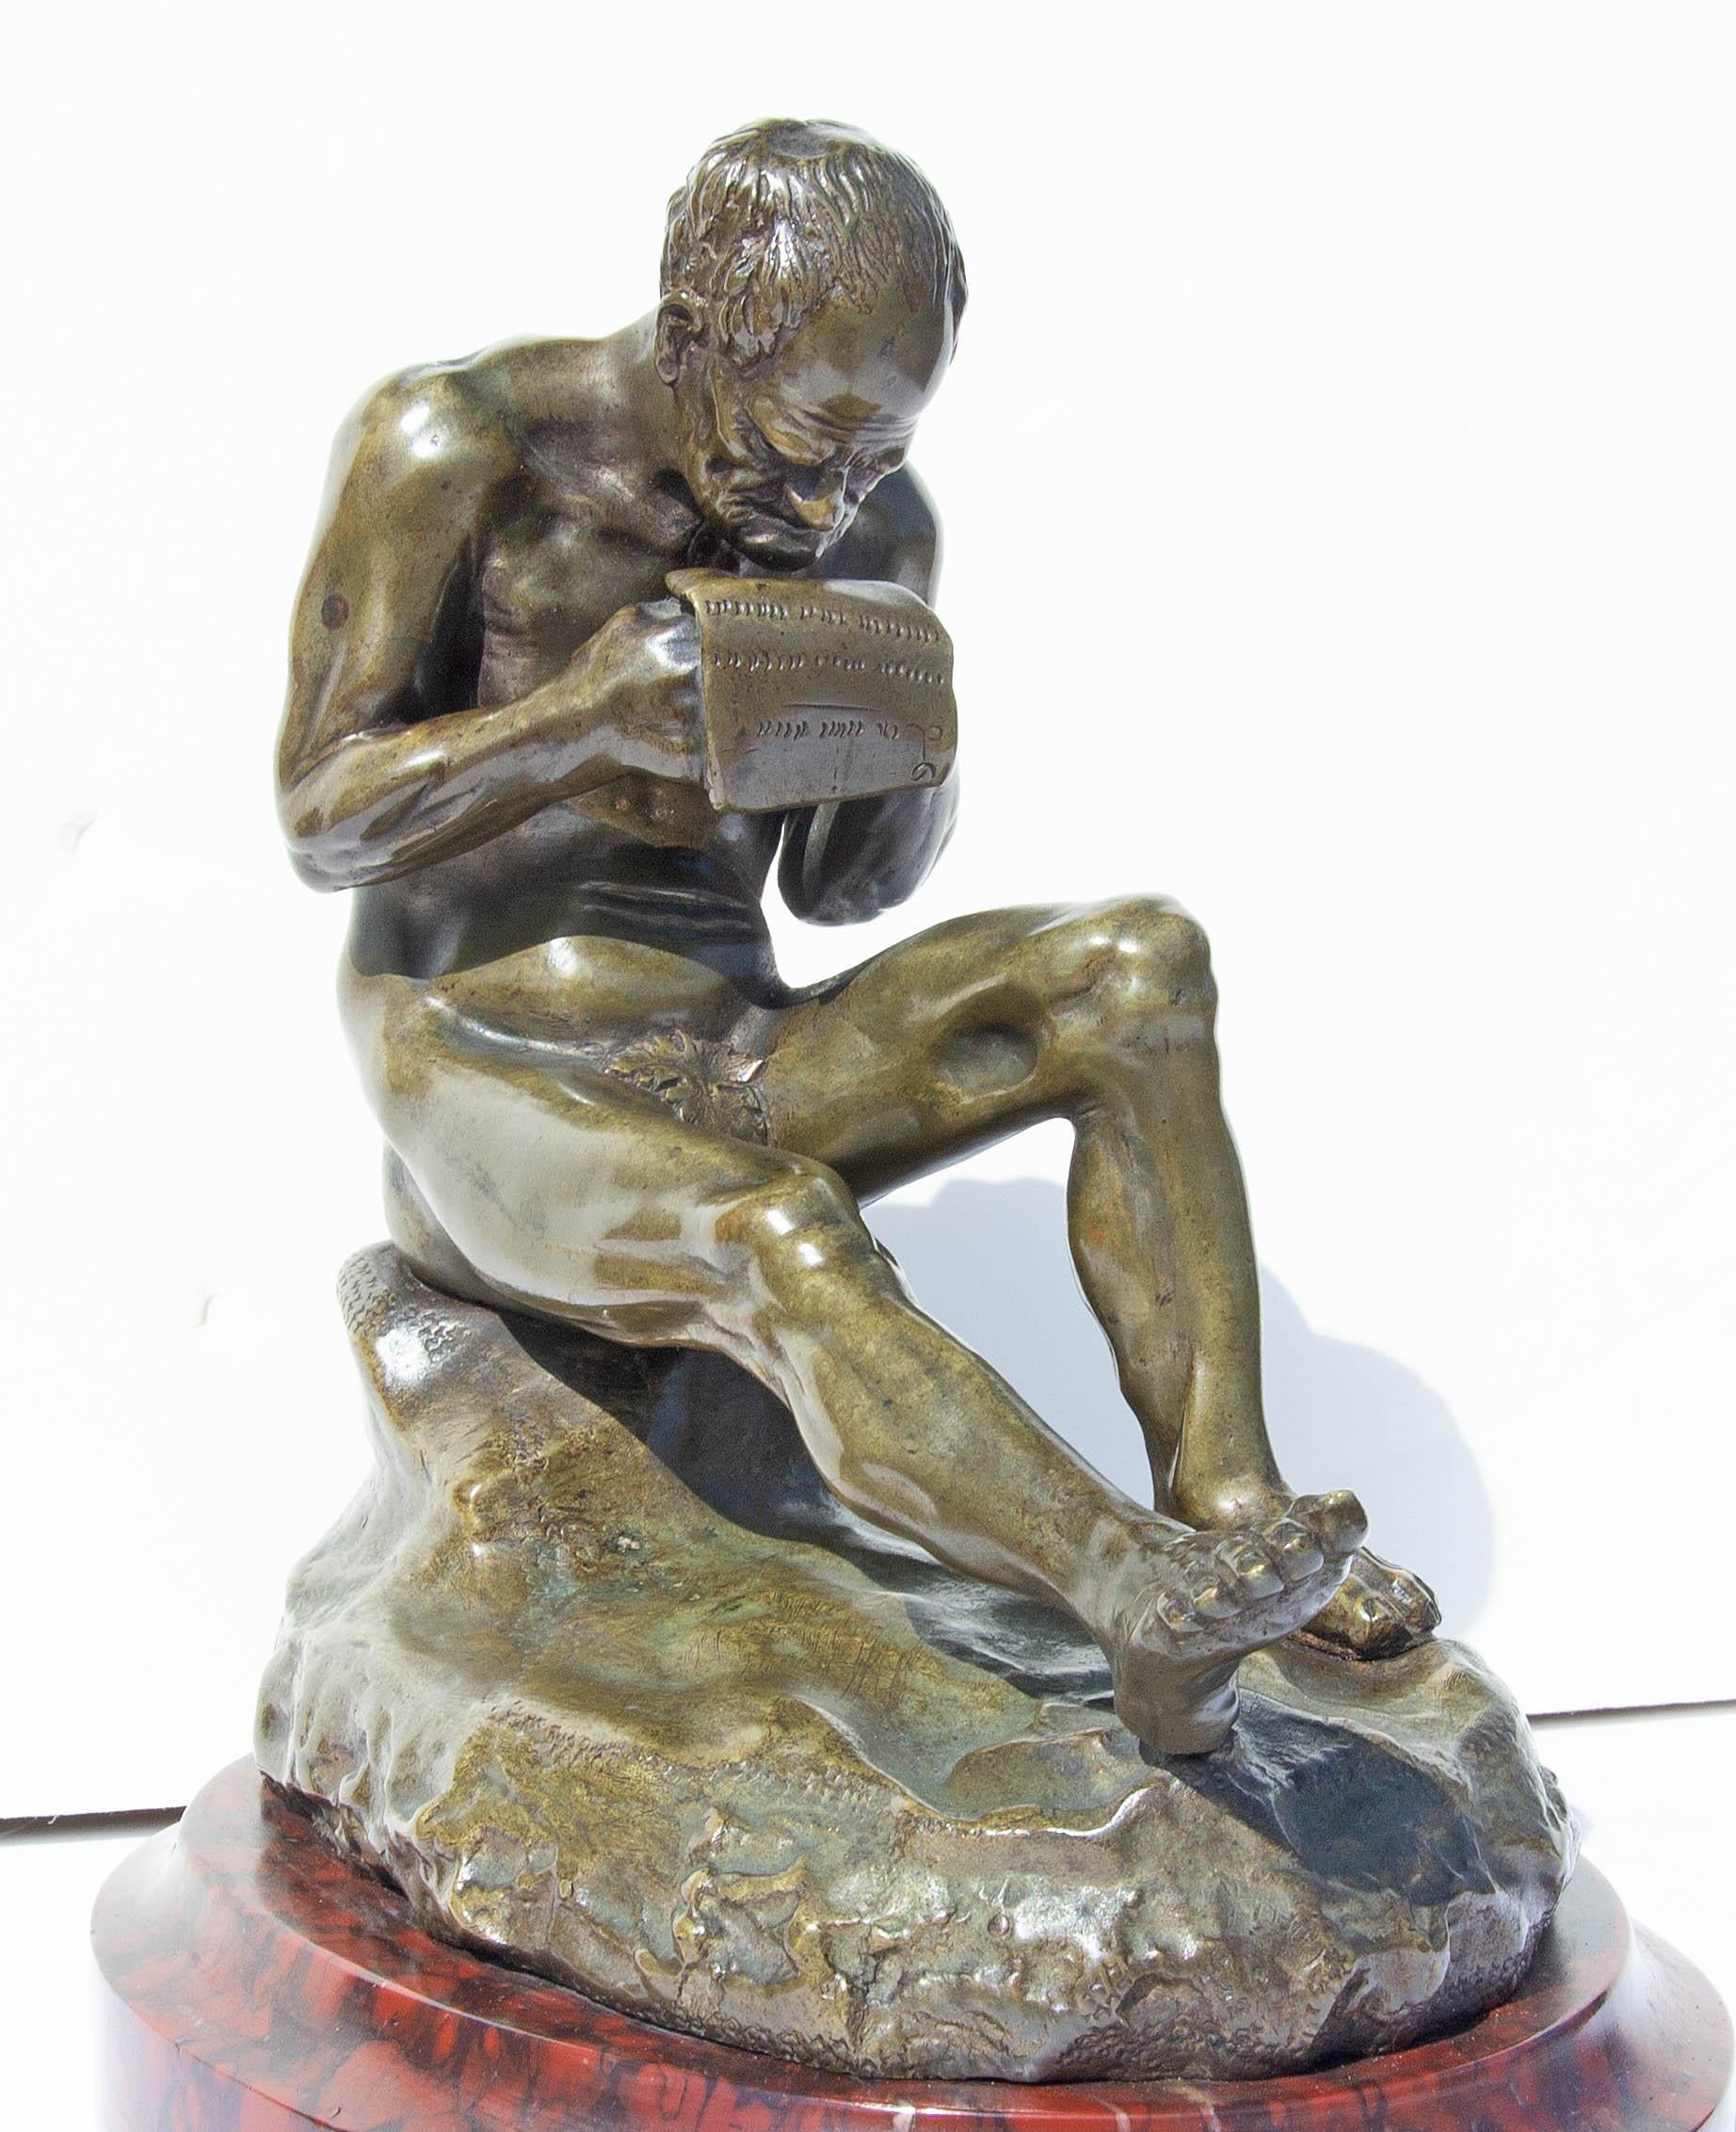 Antique bronze sculpture of man reading a letter or proclamation. Marble base, 19th century. Unsigned.